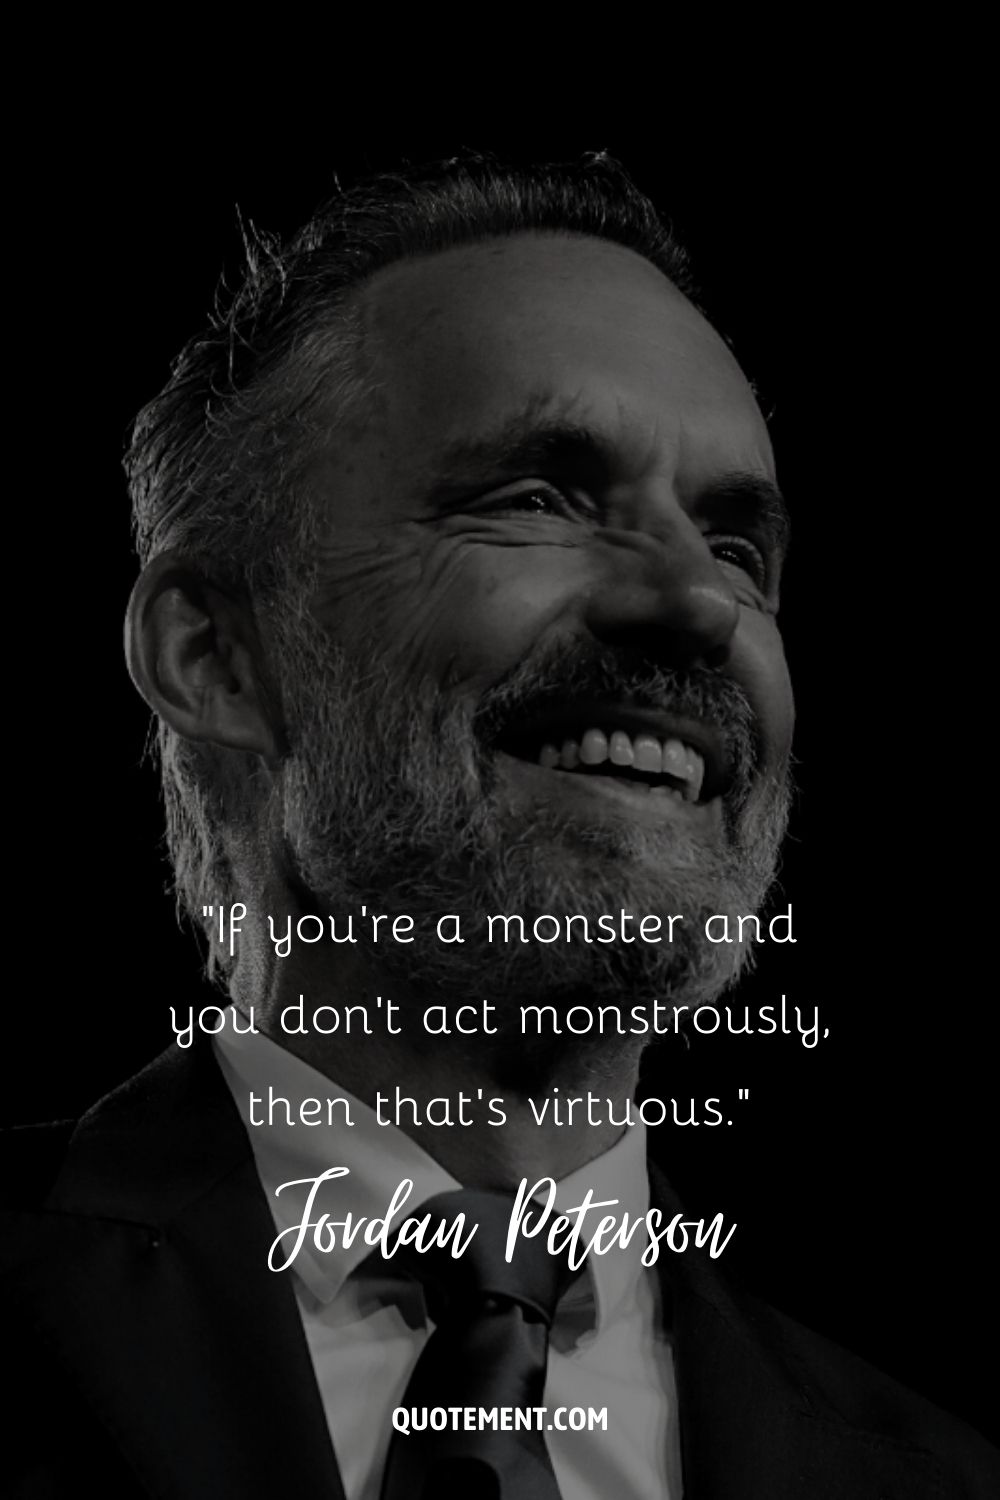 If you're a monster and you don't act monstrously, then that's virtuous.